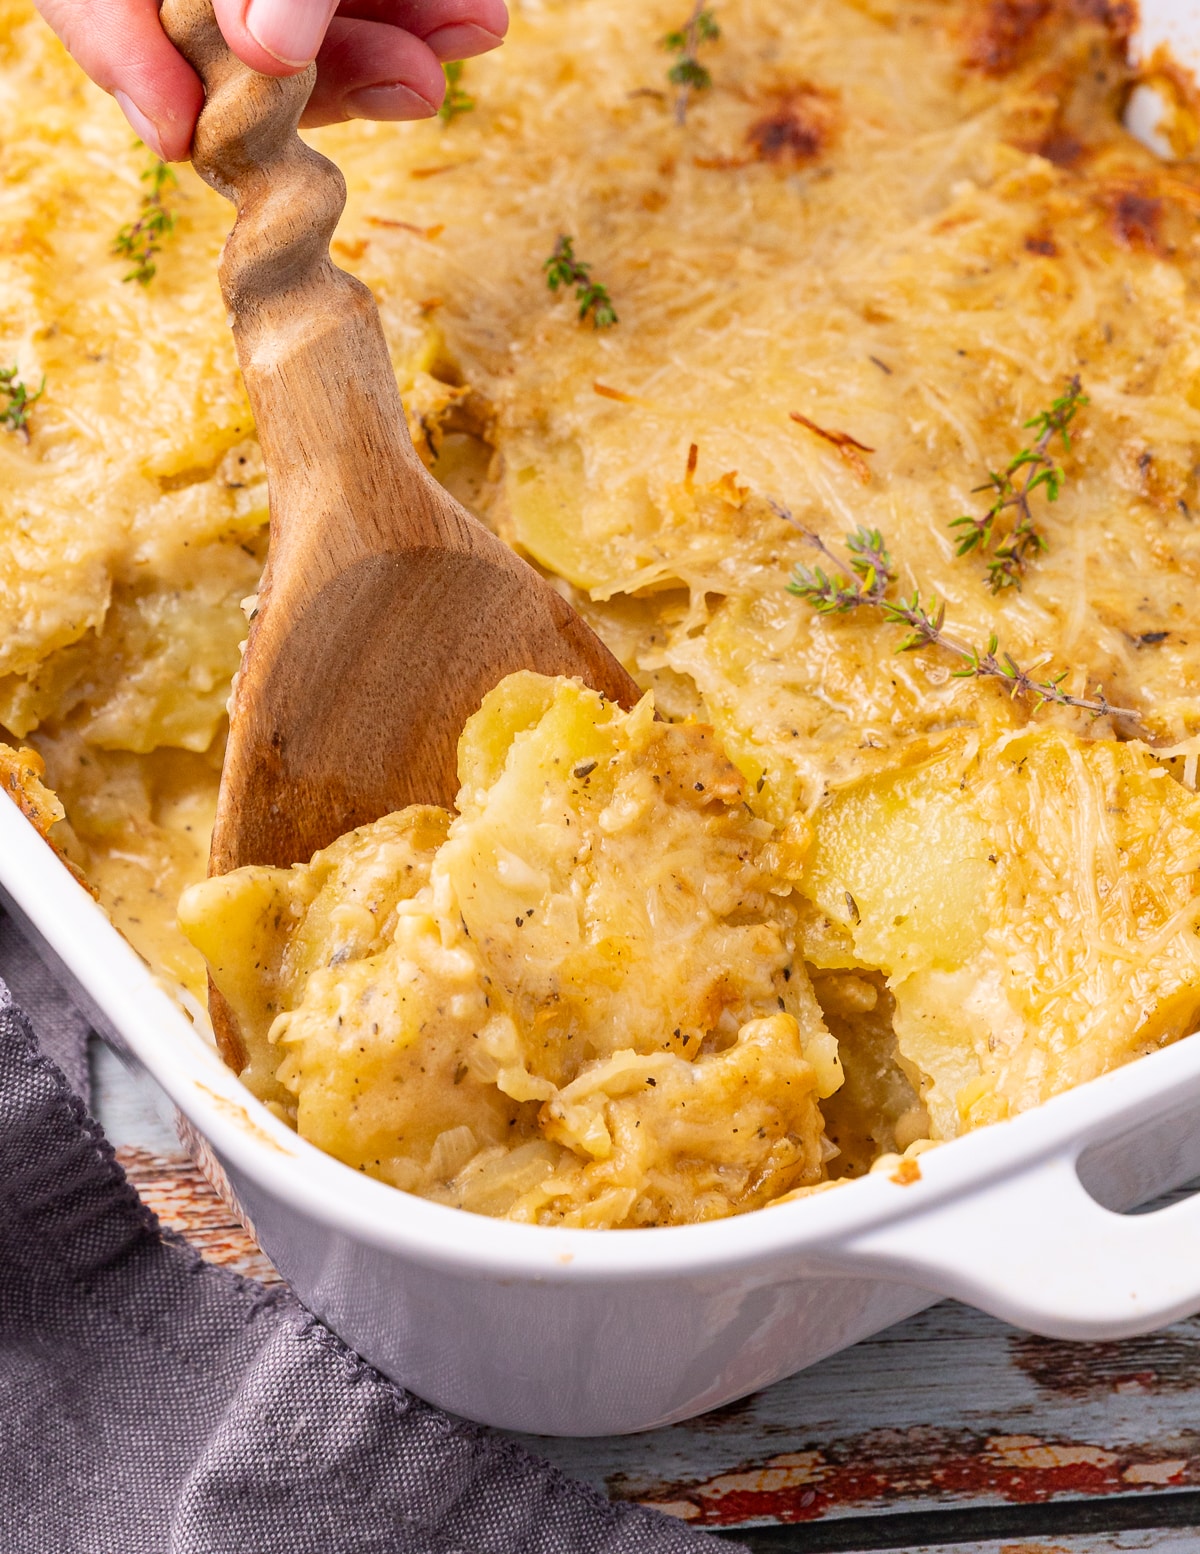 a wooden spoon digging into cheesy, saucy, scalloped potatoes